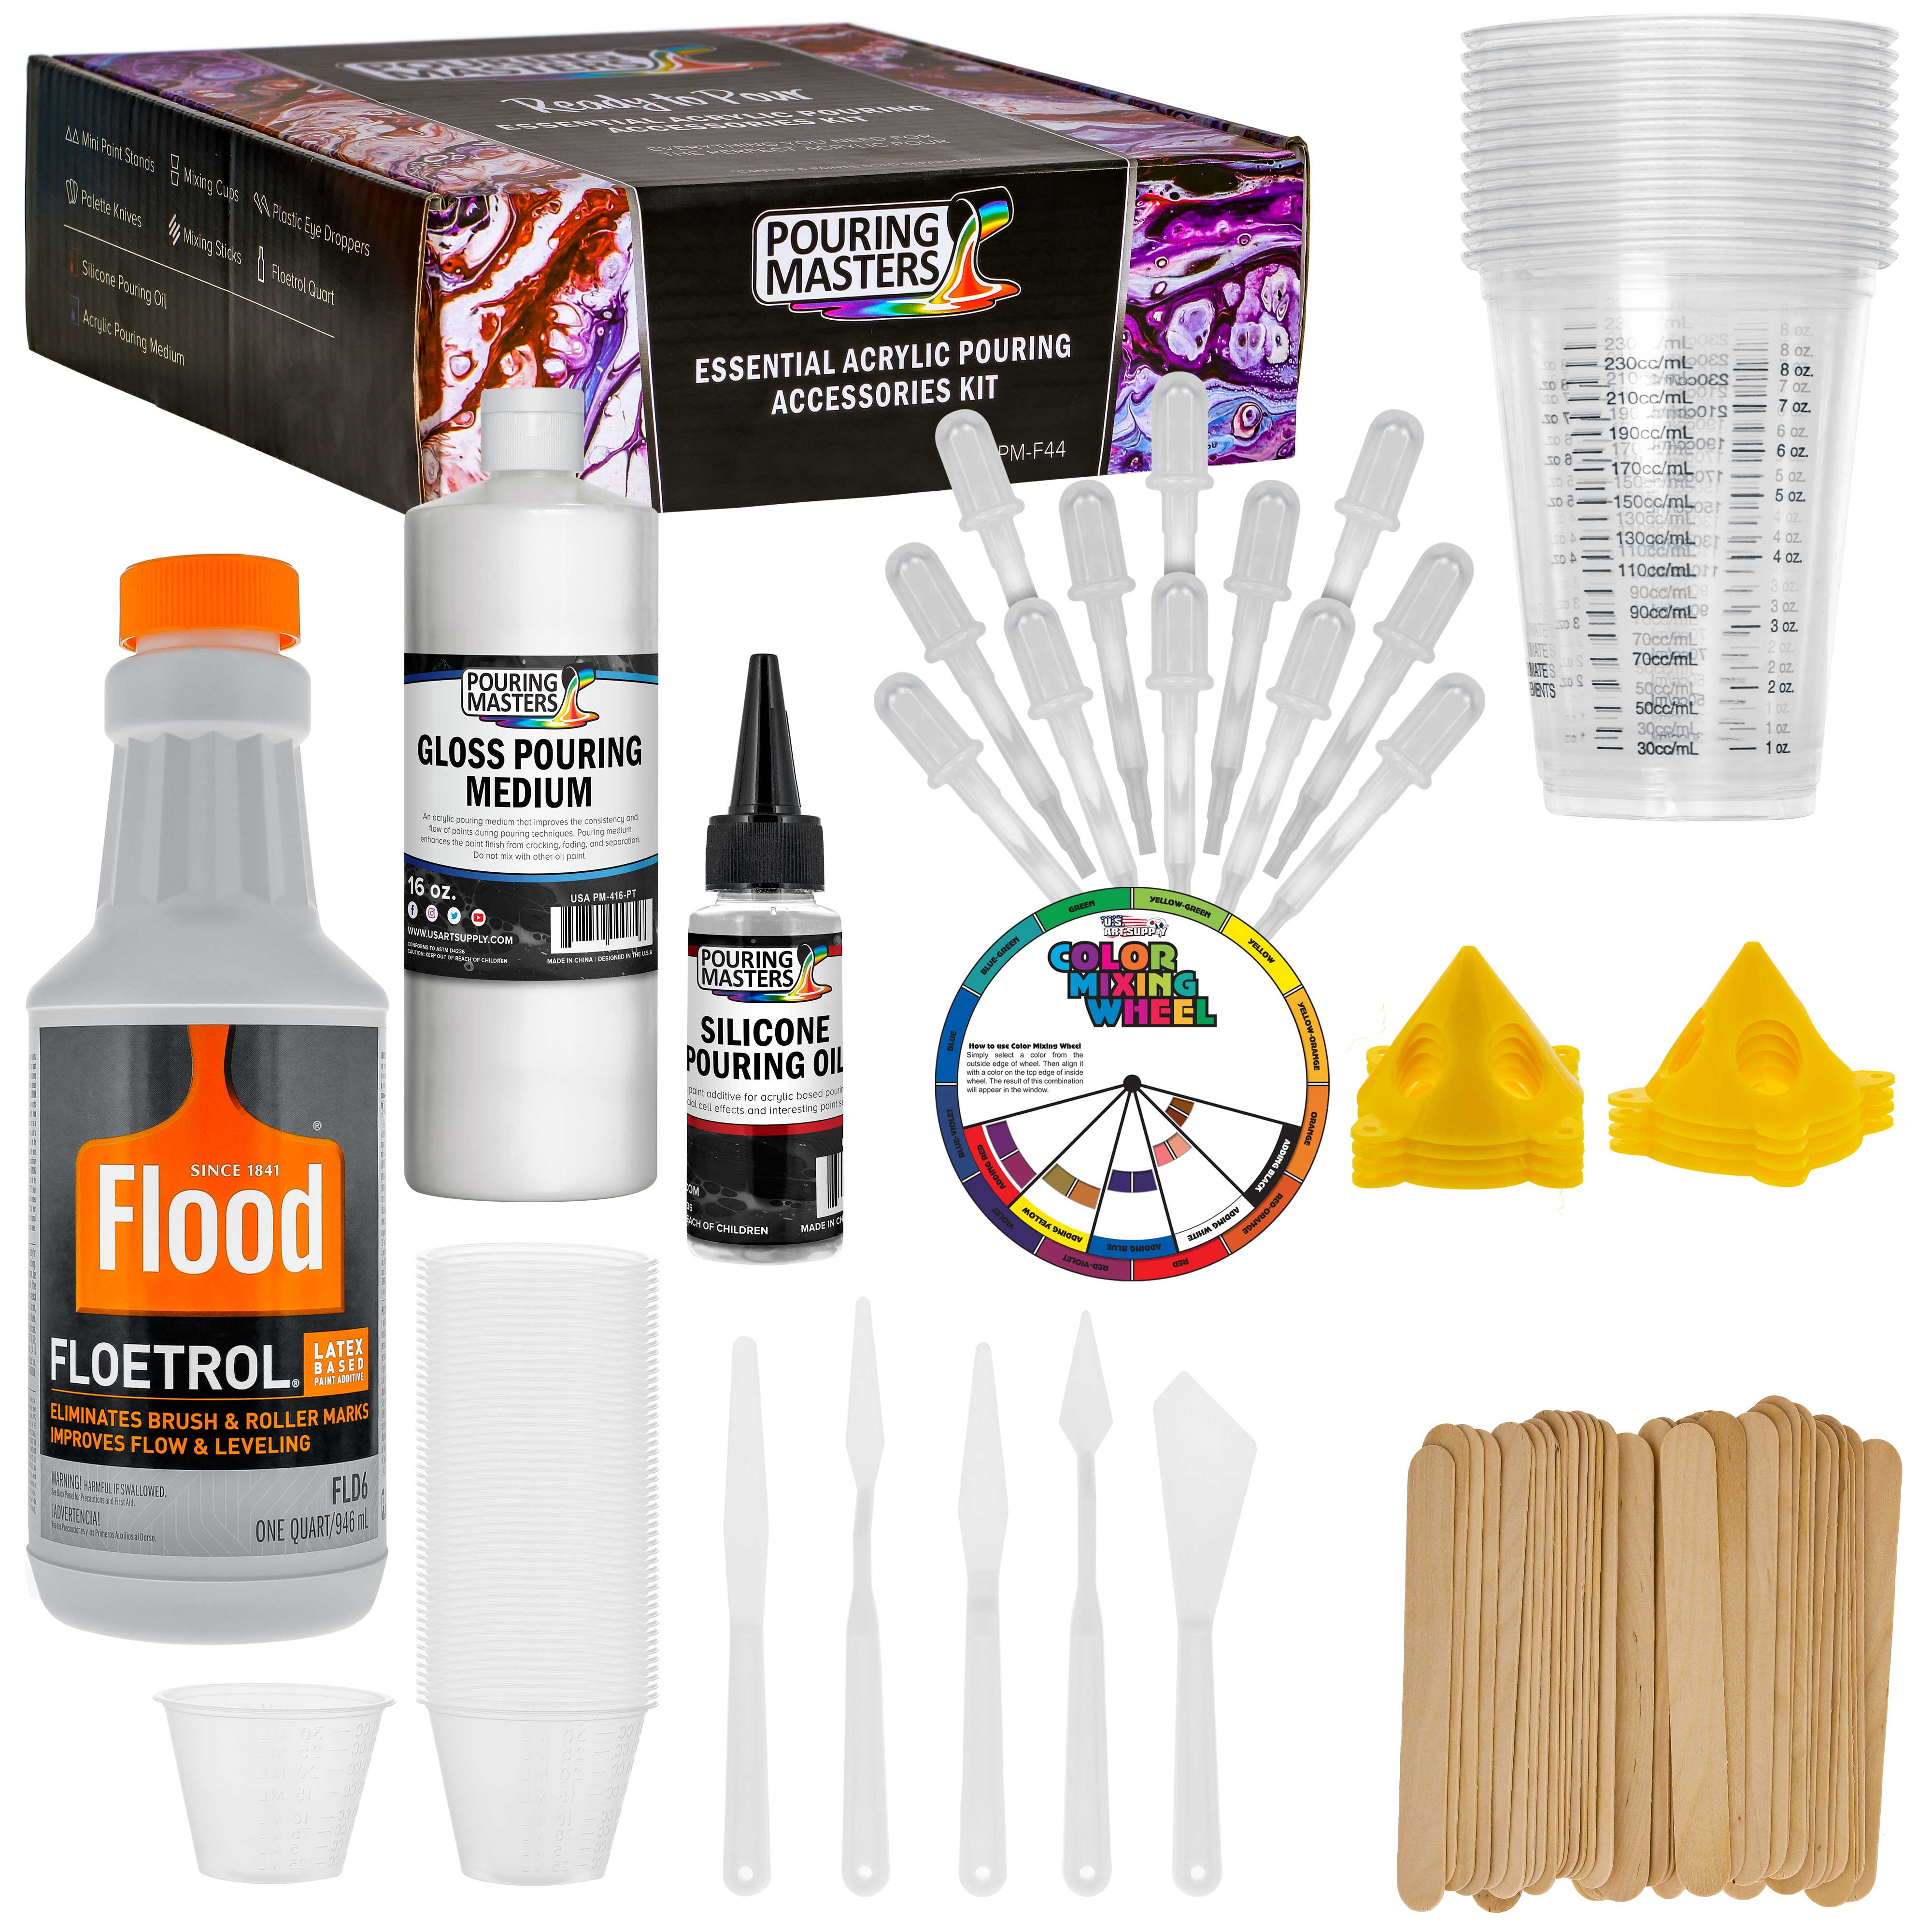 Reviews for Flood 1 Gal. Floetrol Latex Paint Additive